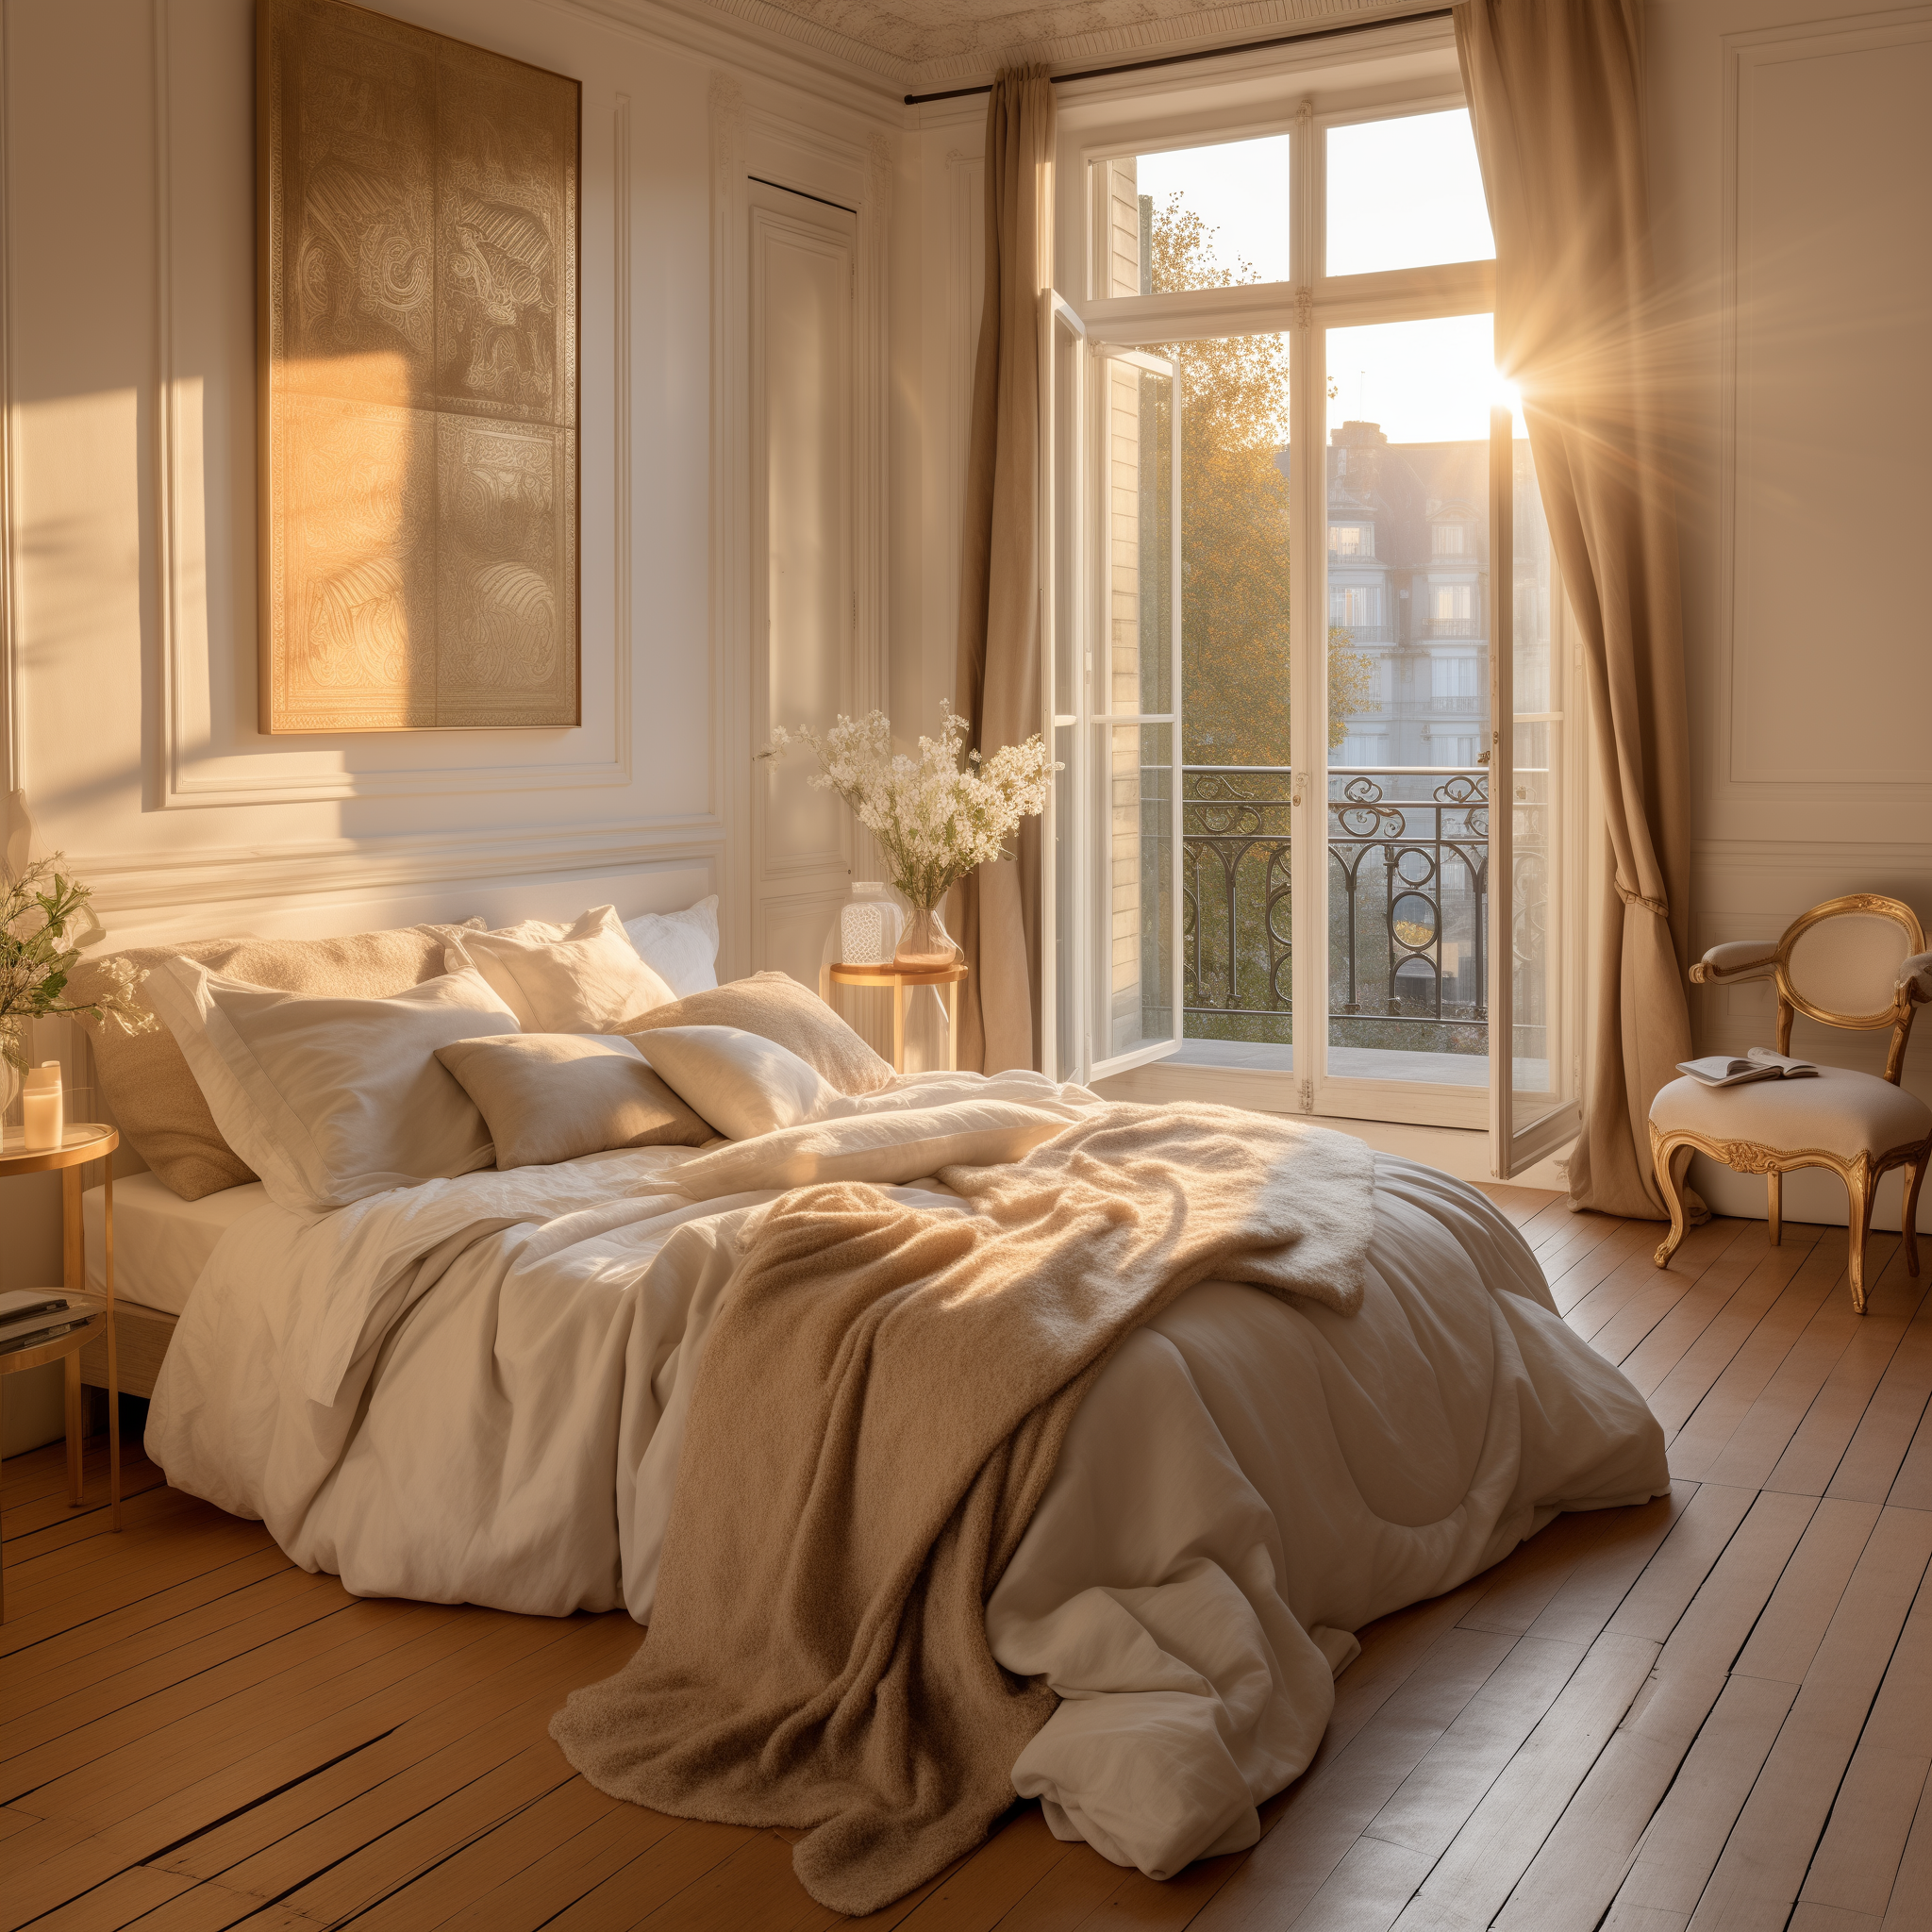 How to decorate your bedroom like a French Parisian (29 bedroom ideas)